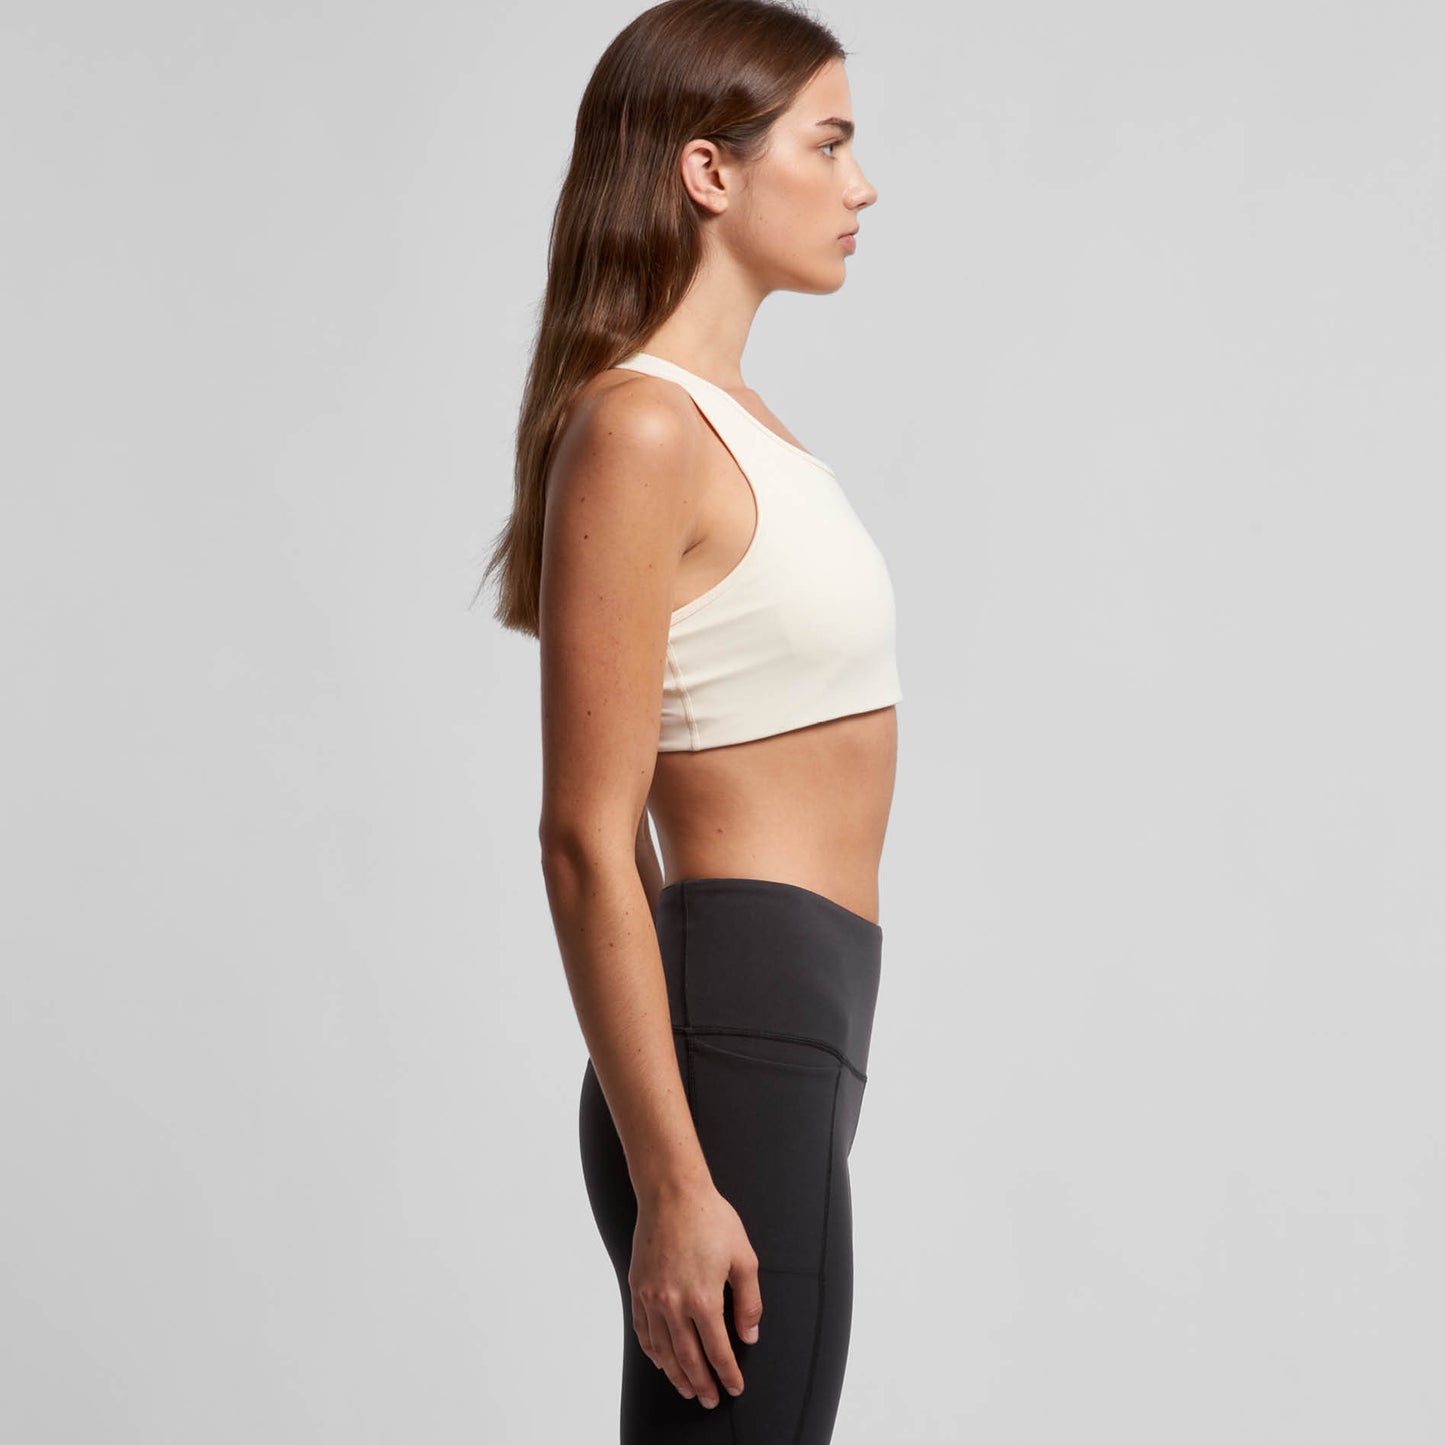 My Edible Wore Off Embroidered Women's Active Sports Bra